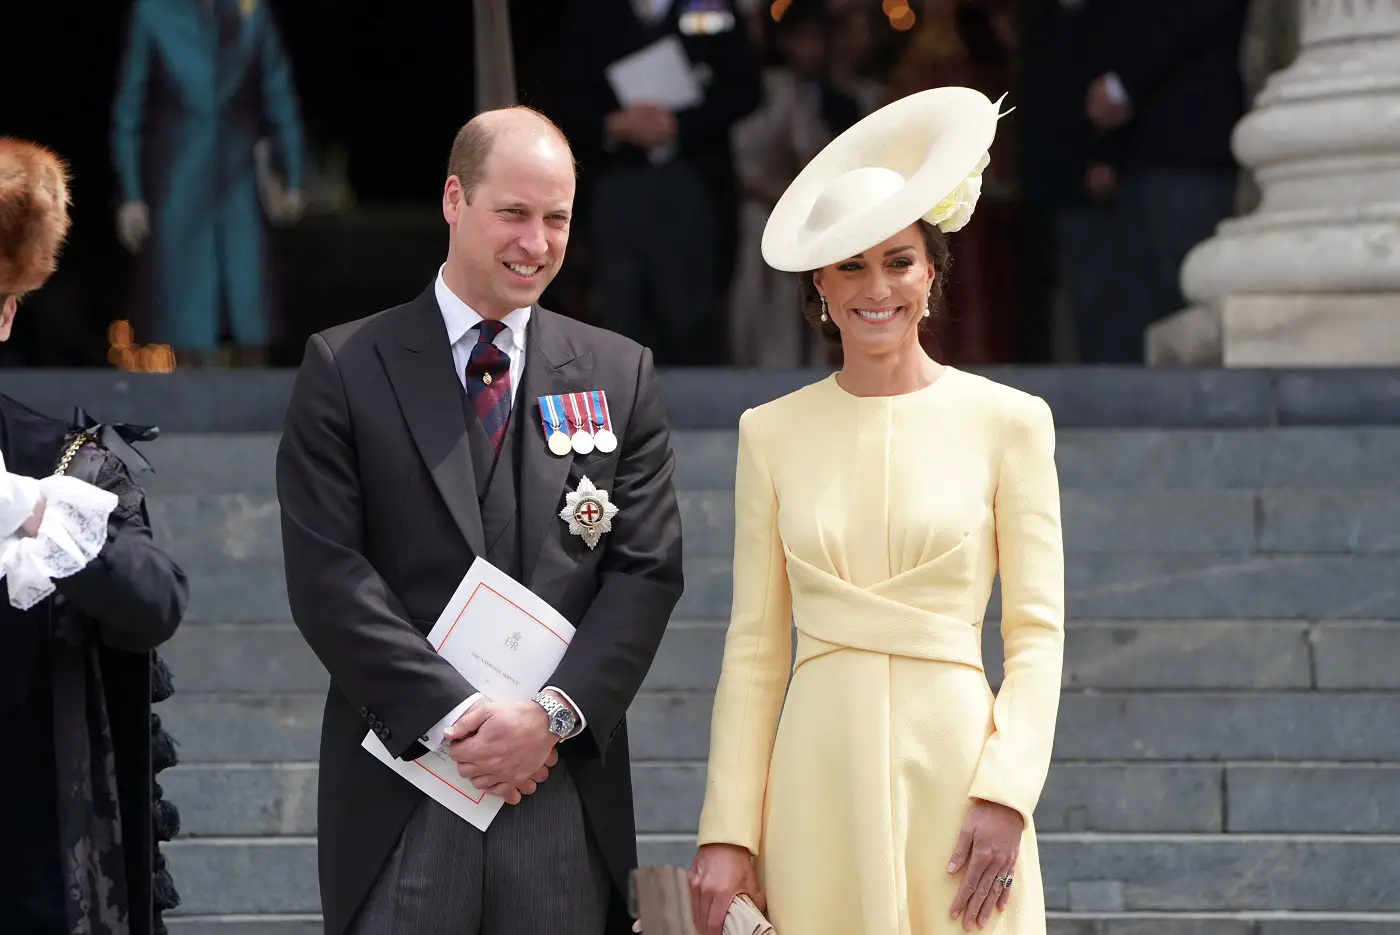 William and Catherine's new official title as of today is The Duke and Duchess of Cornwall, Rothsay, and Cambridge